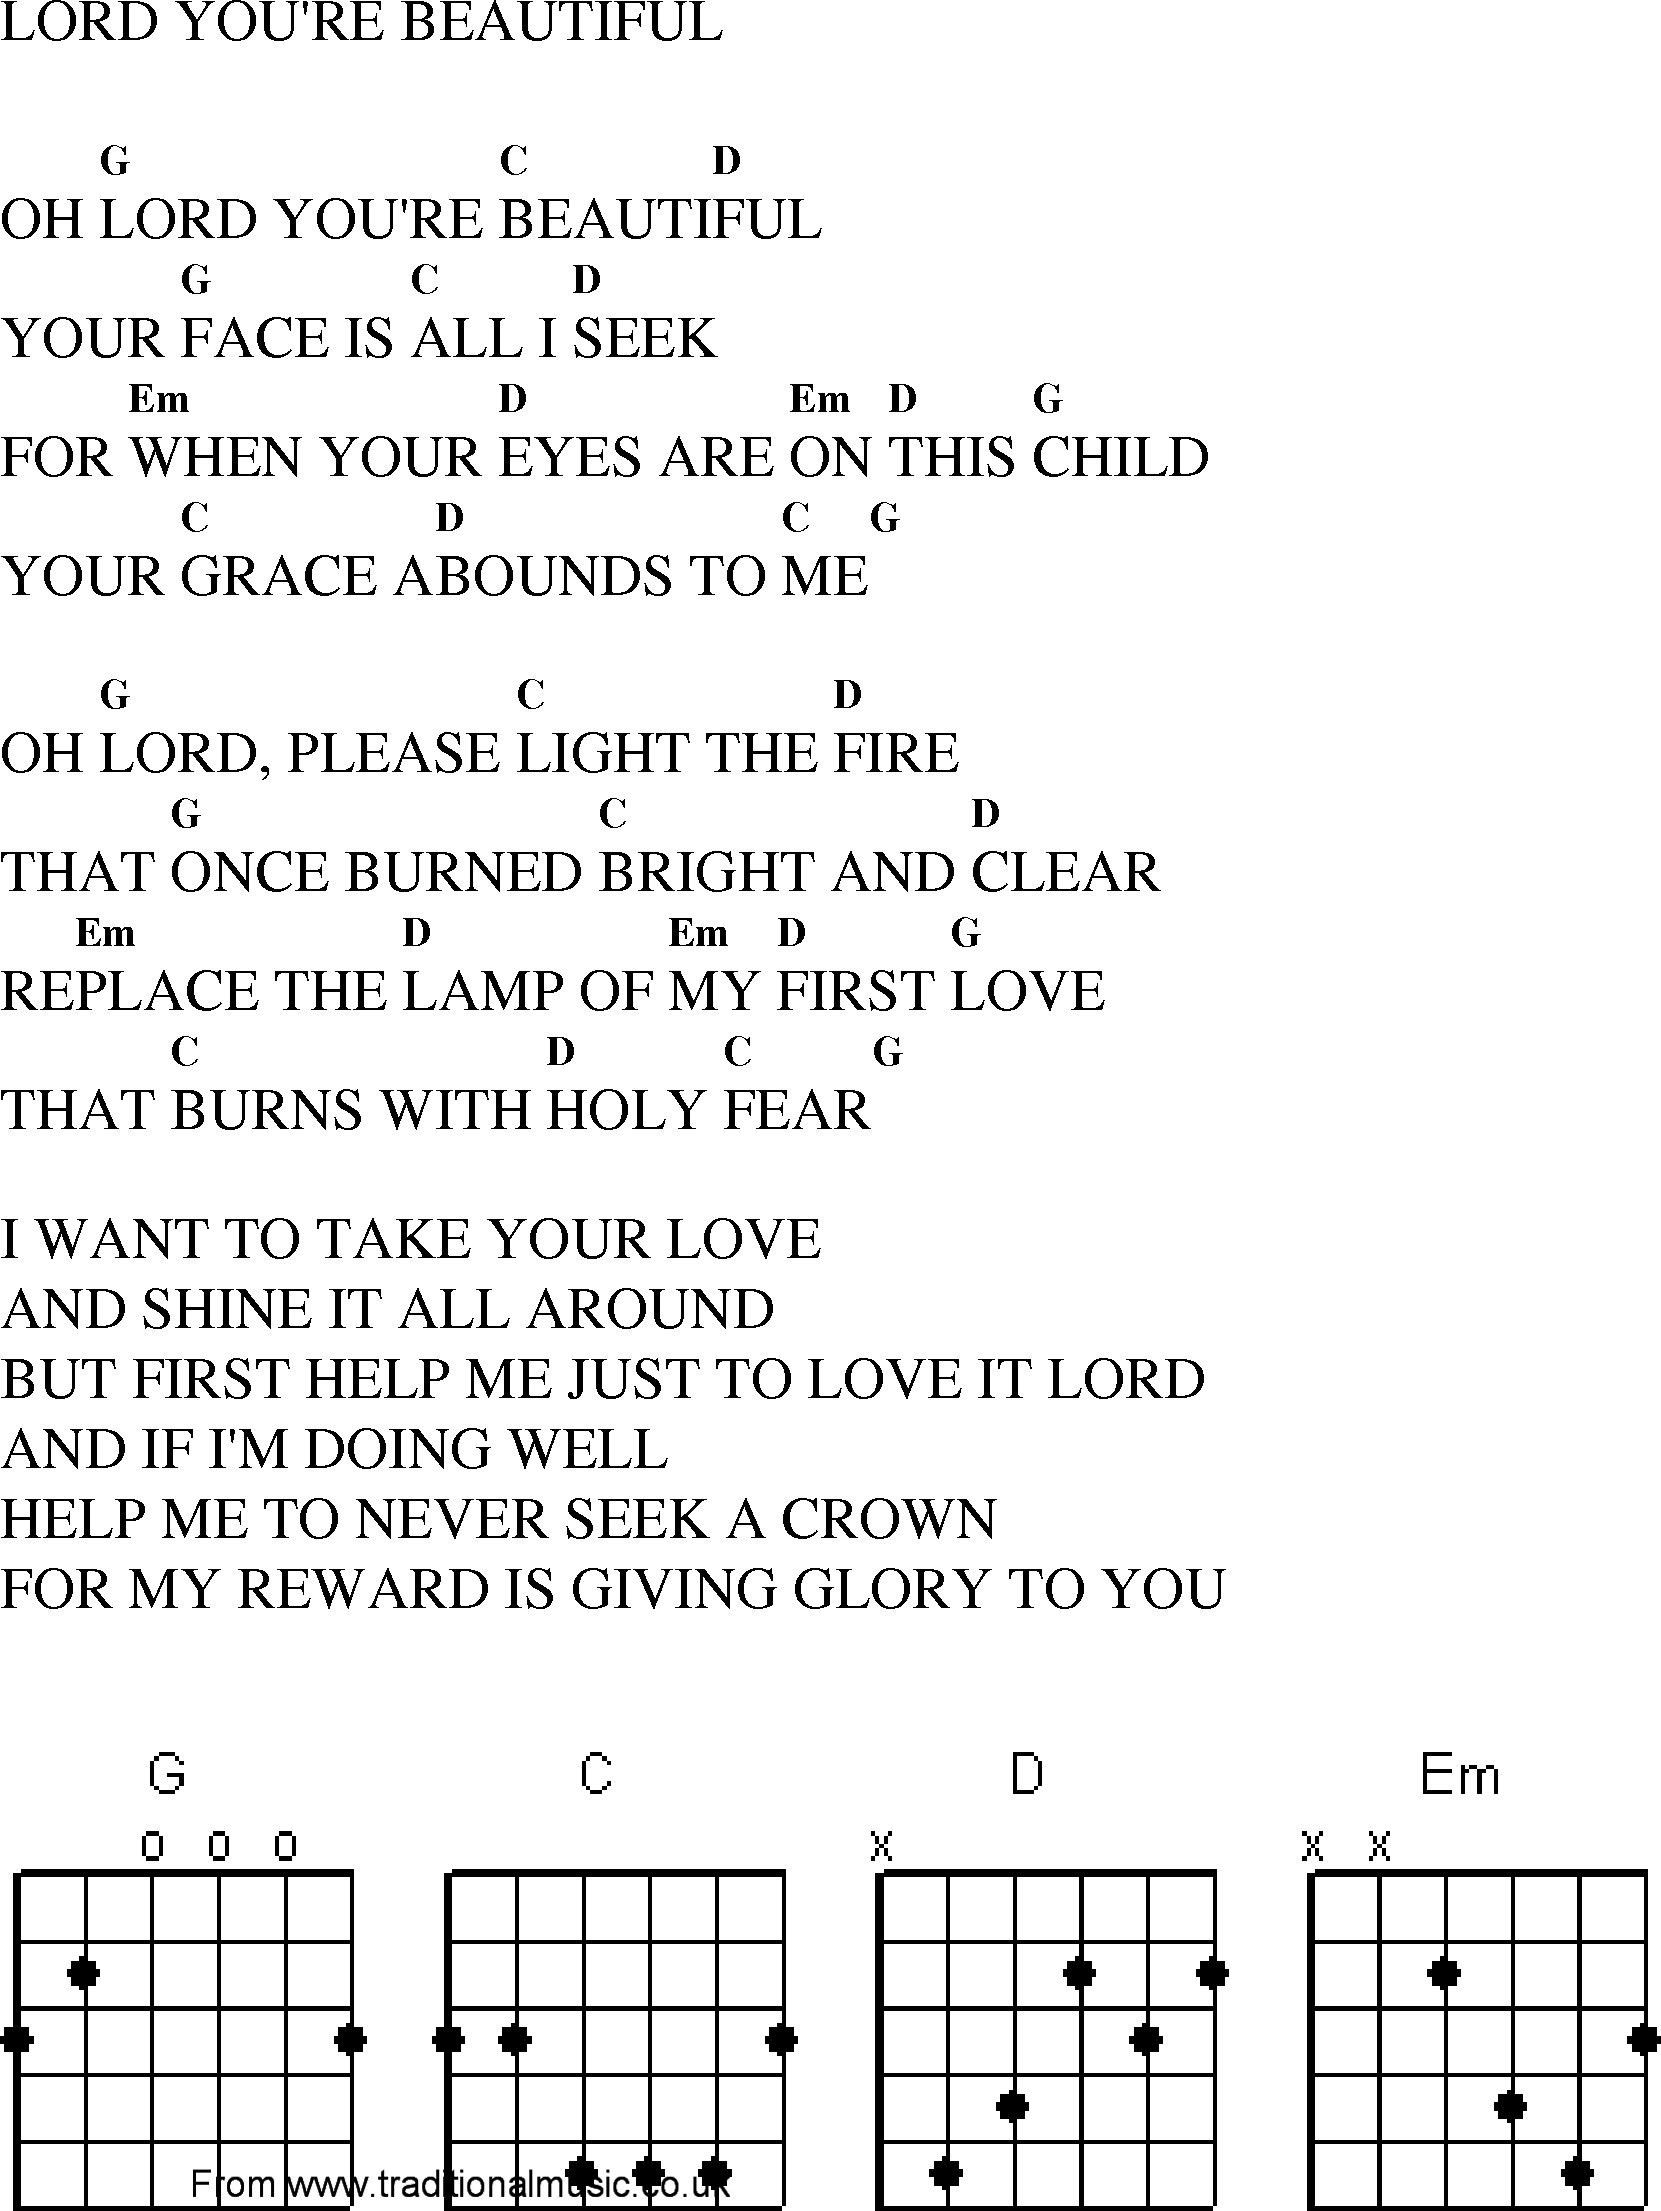 Gospel Song: lord_youre_beautiful, lyrics and chords.